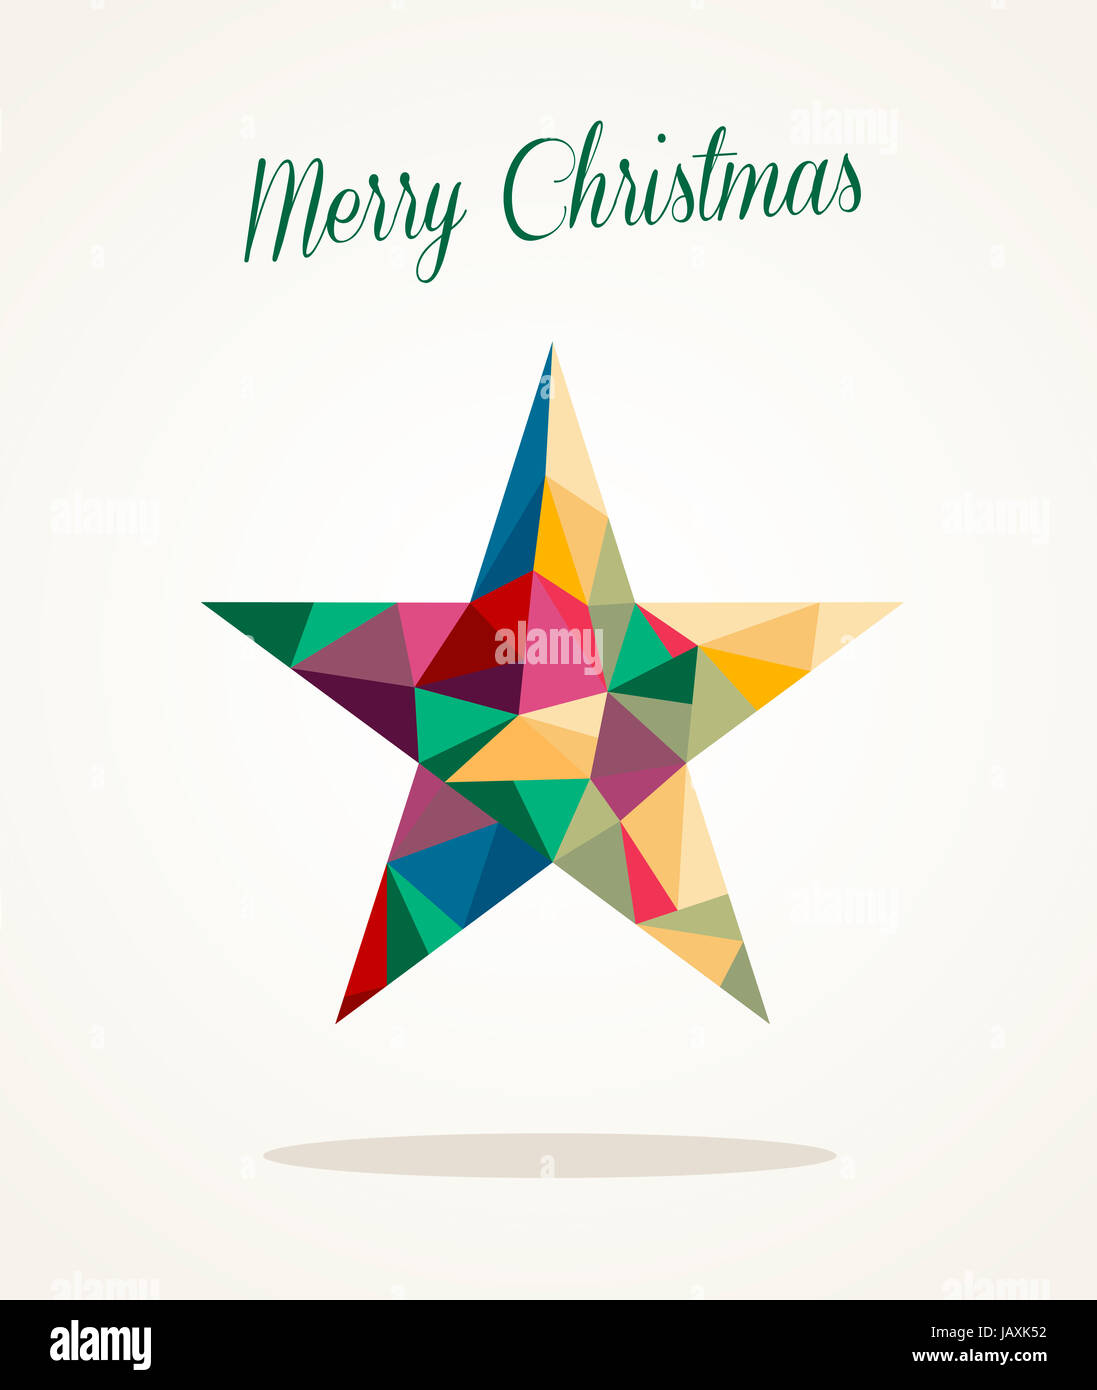 Colorful abstract Merry Christmas star shape triangle composition. EPS10 vector file organized in layers for easy editing. Stock Photo